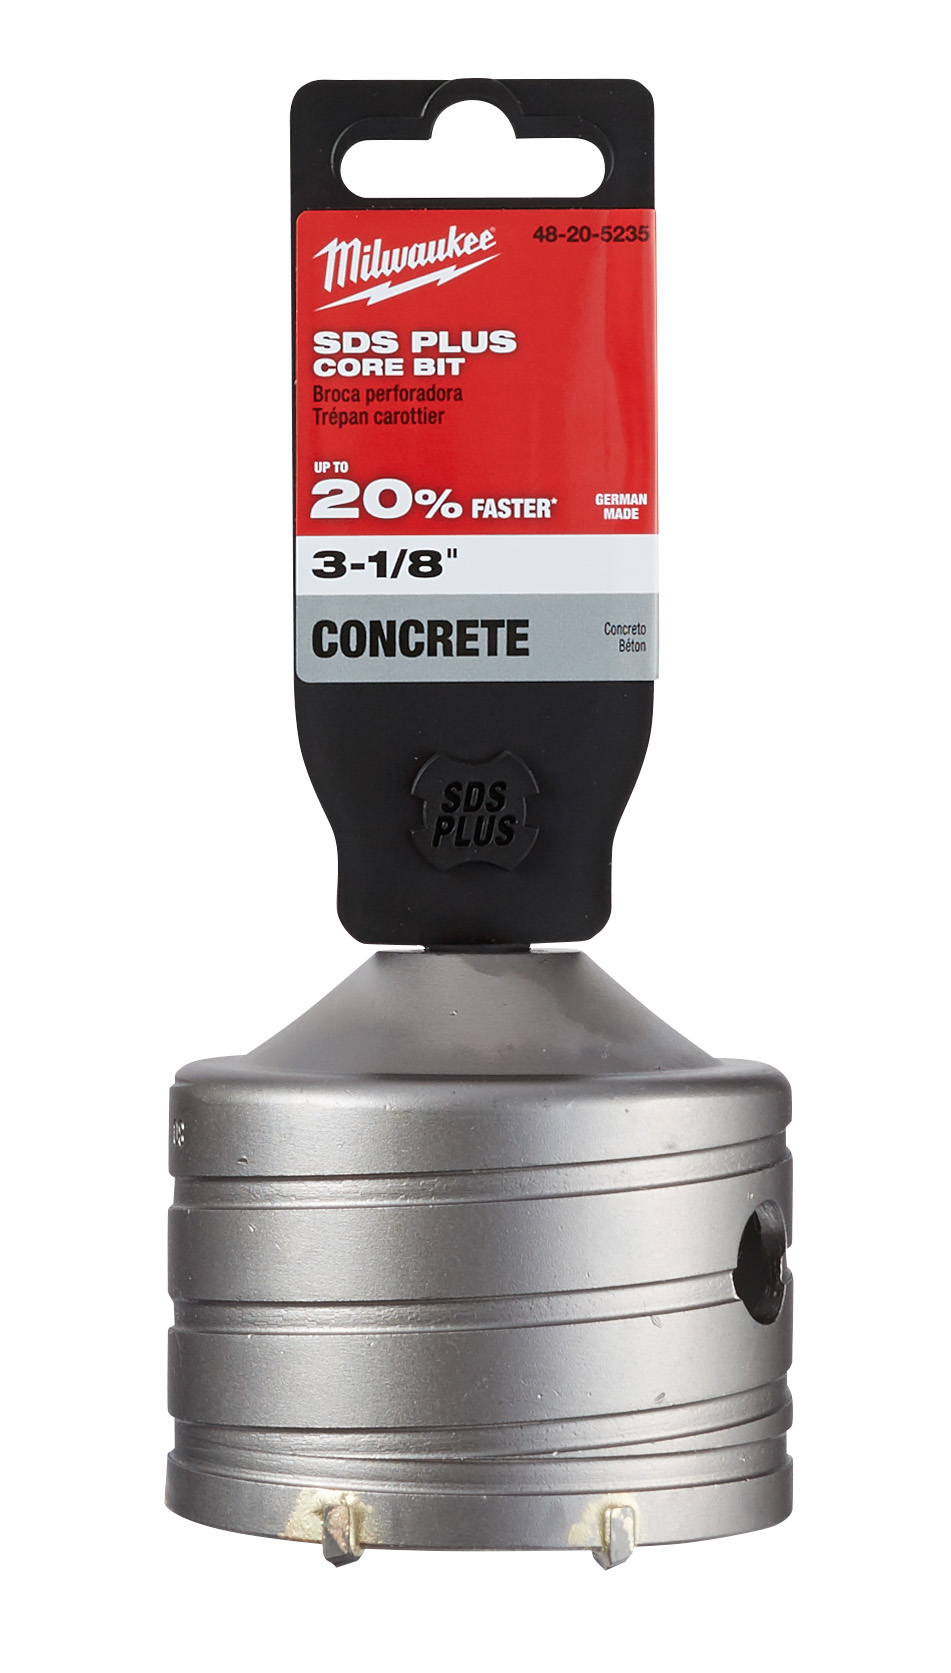 48-20-5235 045242486397 Milwaukee® SDS-Plus masonry core bits are ideal for drilling large holes in brick, block, and concrete with SDS-Plus rotary hammers. Asymmetrical Carbide teeth break up material more effectively resulting in up to 20% faster drilling speeds. Centering bits allow for easy alignment of the hole and precise spot drilling. The versatile two-piece design allows users to drill with several different core bit sizes using one adapter. The spiral core body design minimizes friction in the hole and aids in dust removal during the application. Core bits cut with the outer edge only, therefore the operator must remove the inner core continue drilling for holes deeper than 2 in.